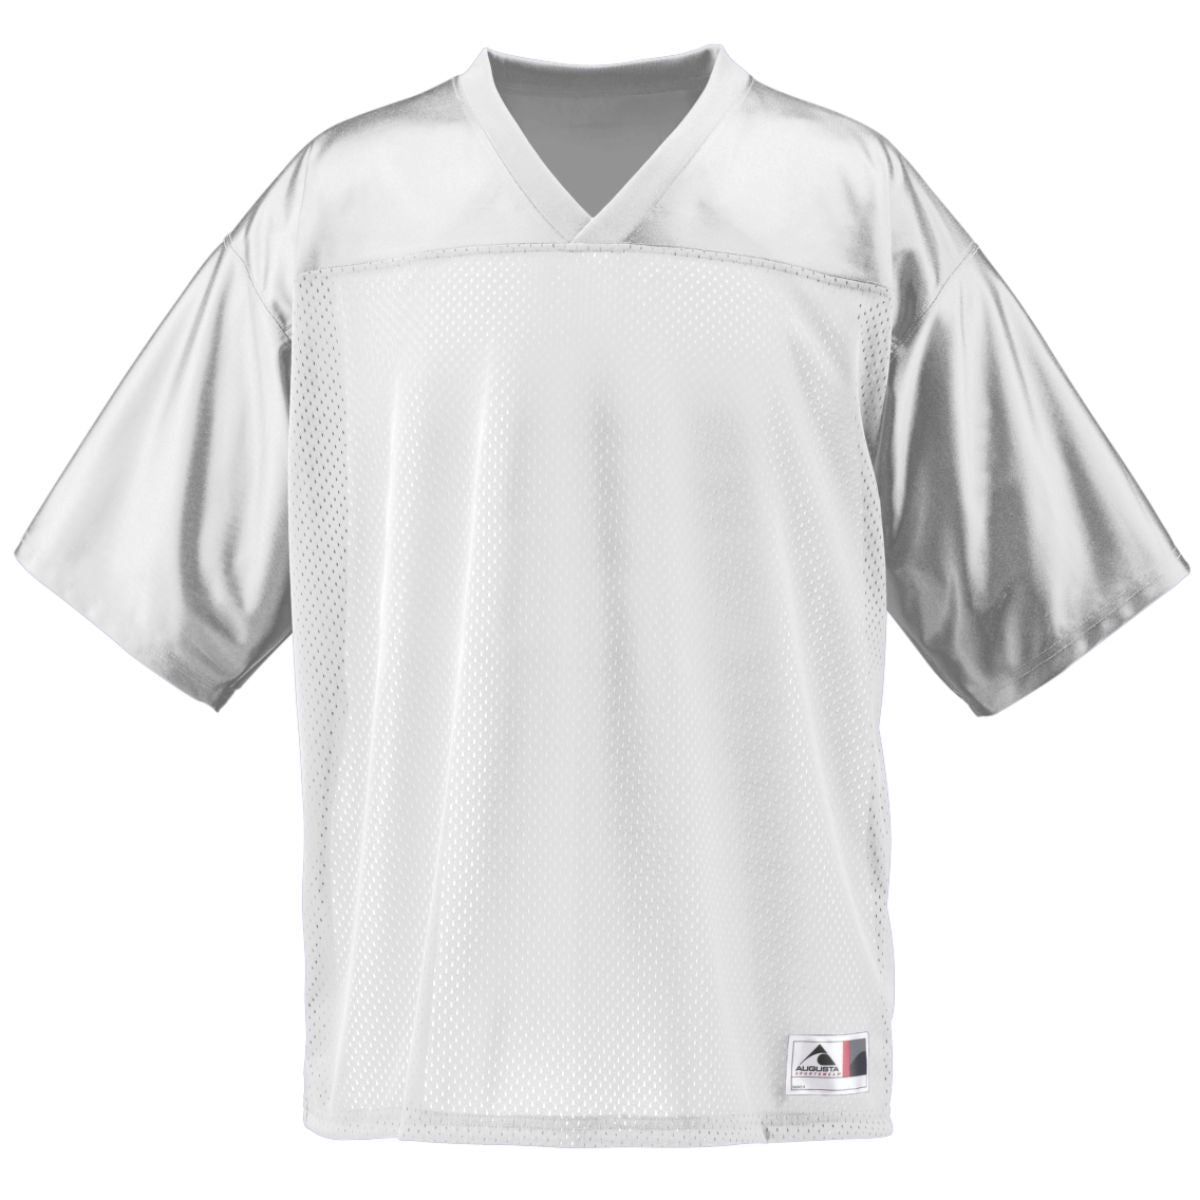 Augusta Sportswear Youth Stadium Replica Jersey in White  -Part of the Youth, Youth-Jersey, Augusta-Products, Football, Shirts, All-Sports, All-Sports-1 product lines at KanaleyCreations.com